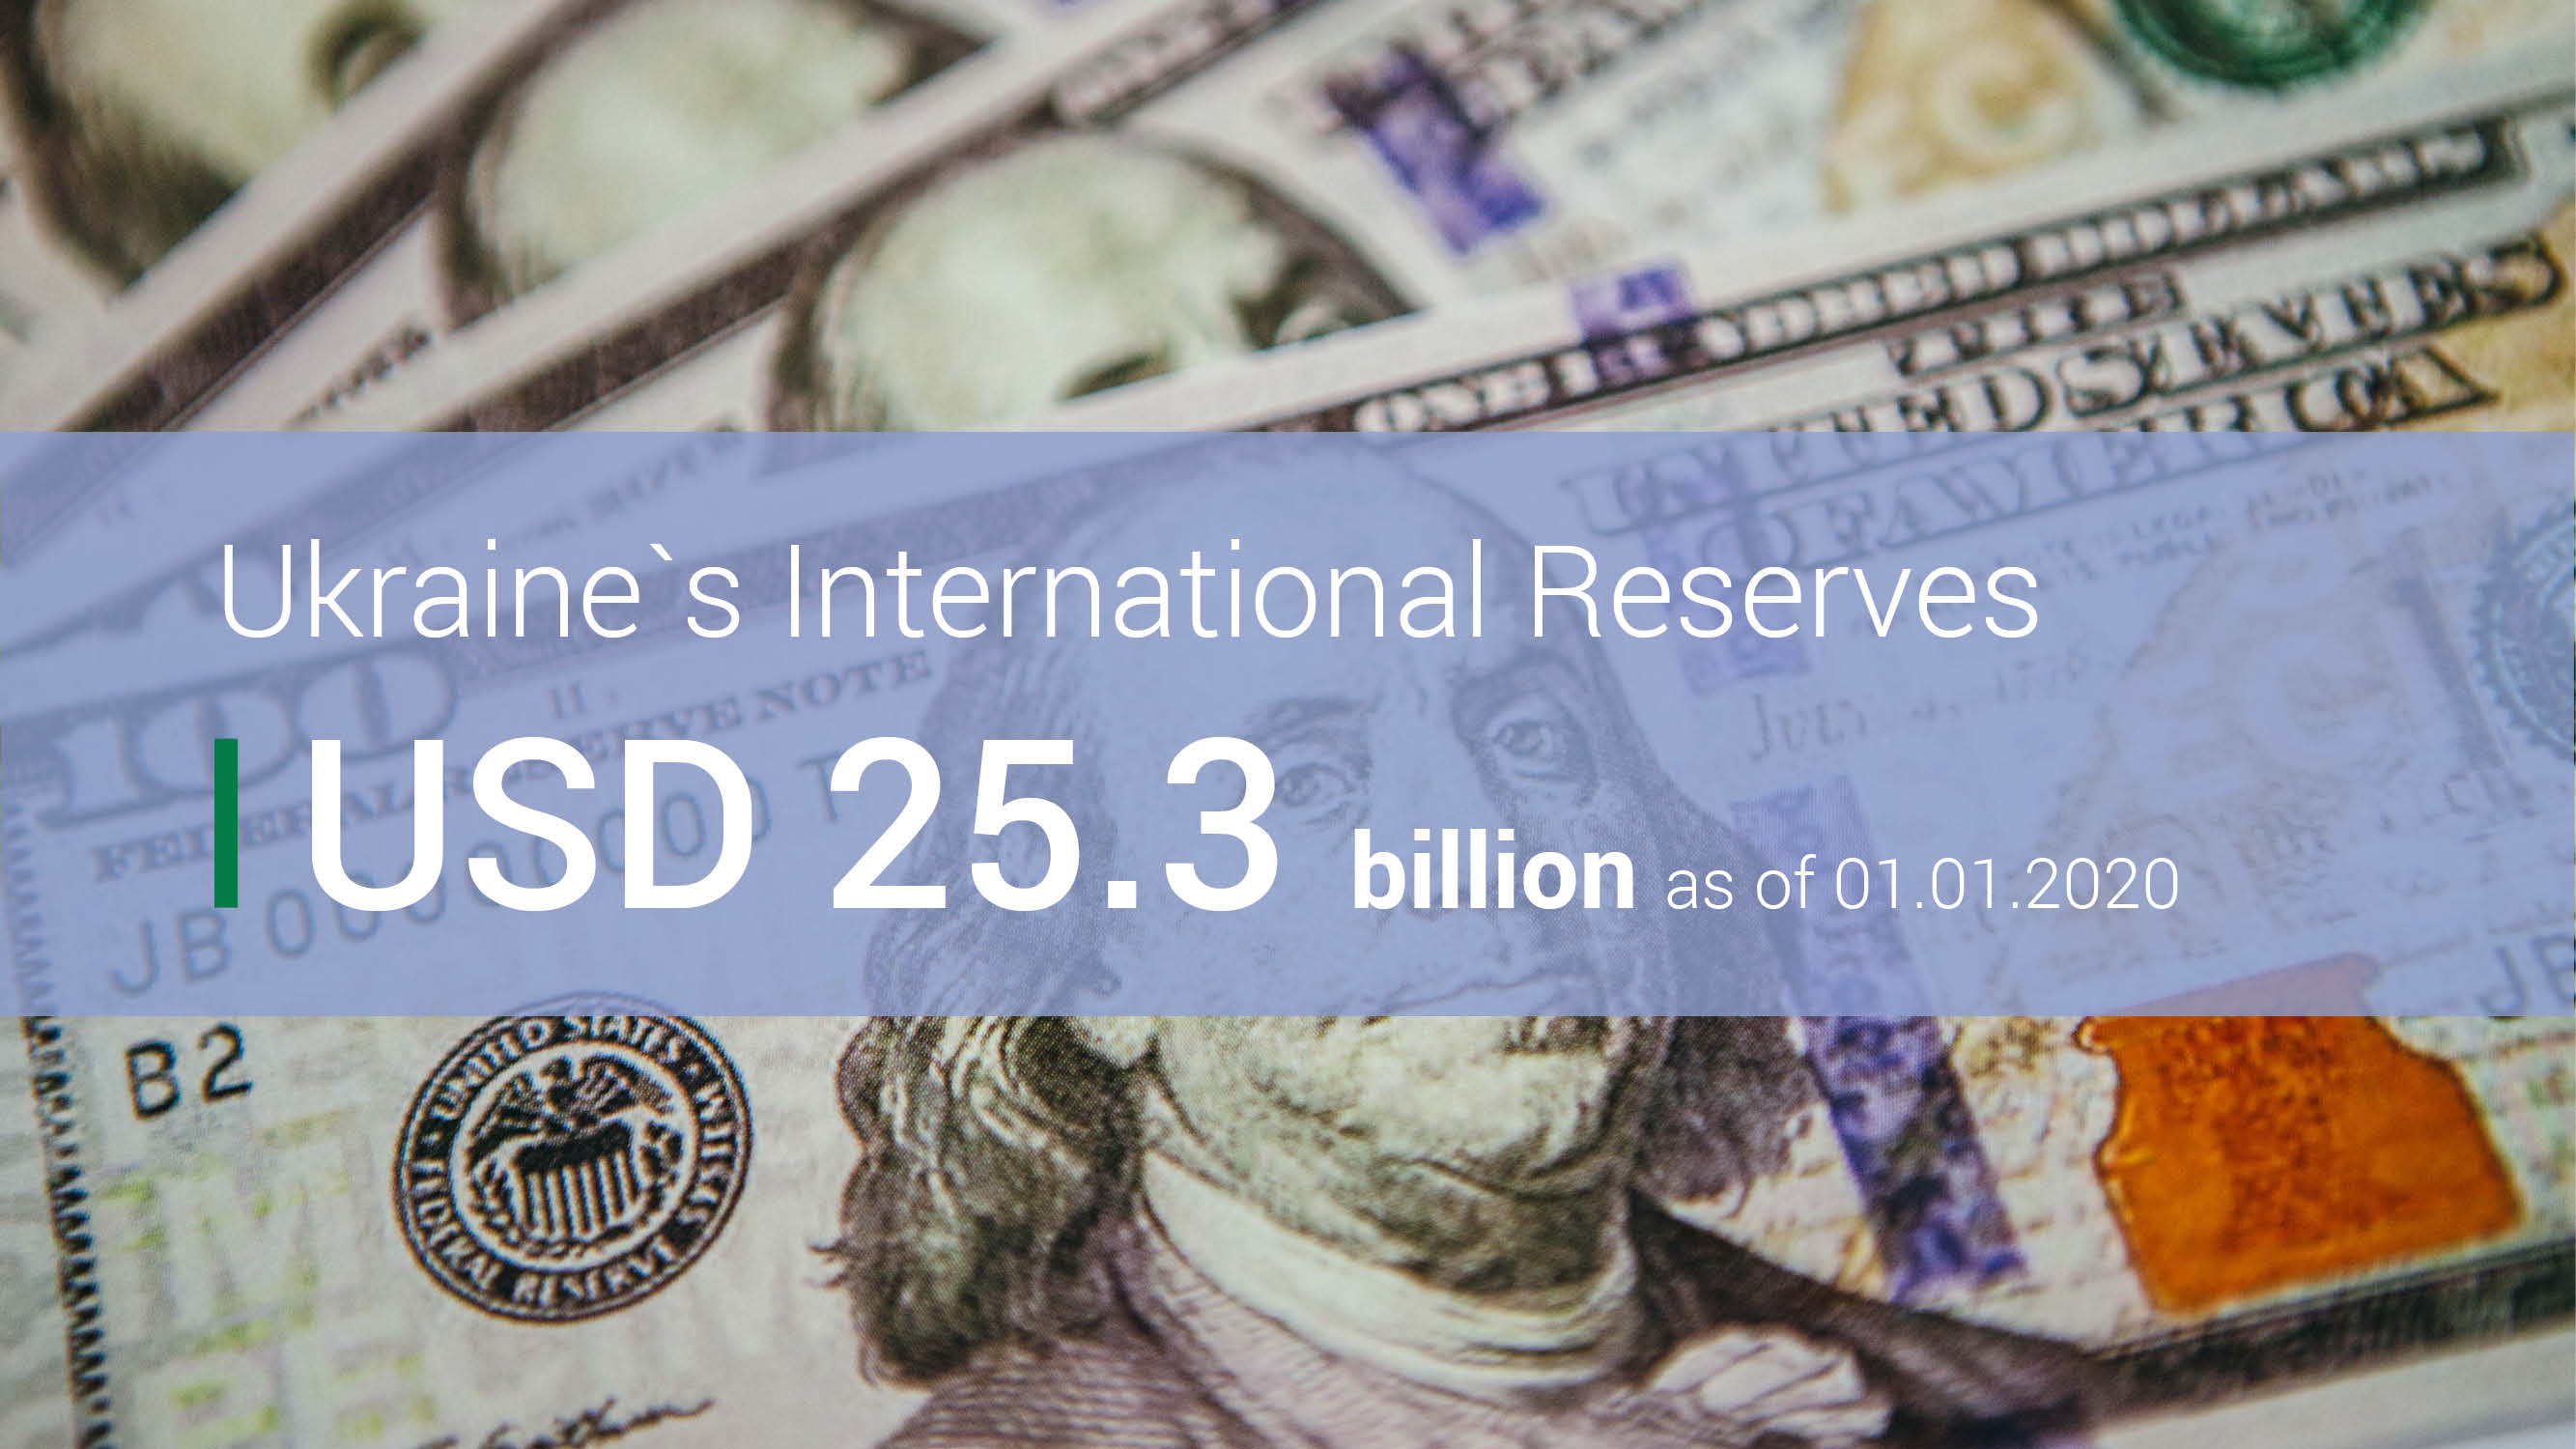 Ukraine’s International Reserves Increase to a Seven-Year High in 2019